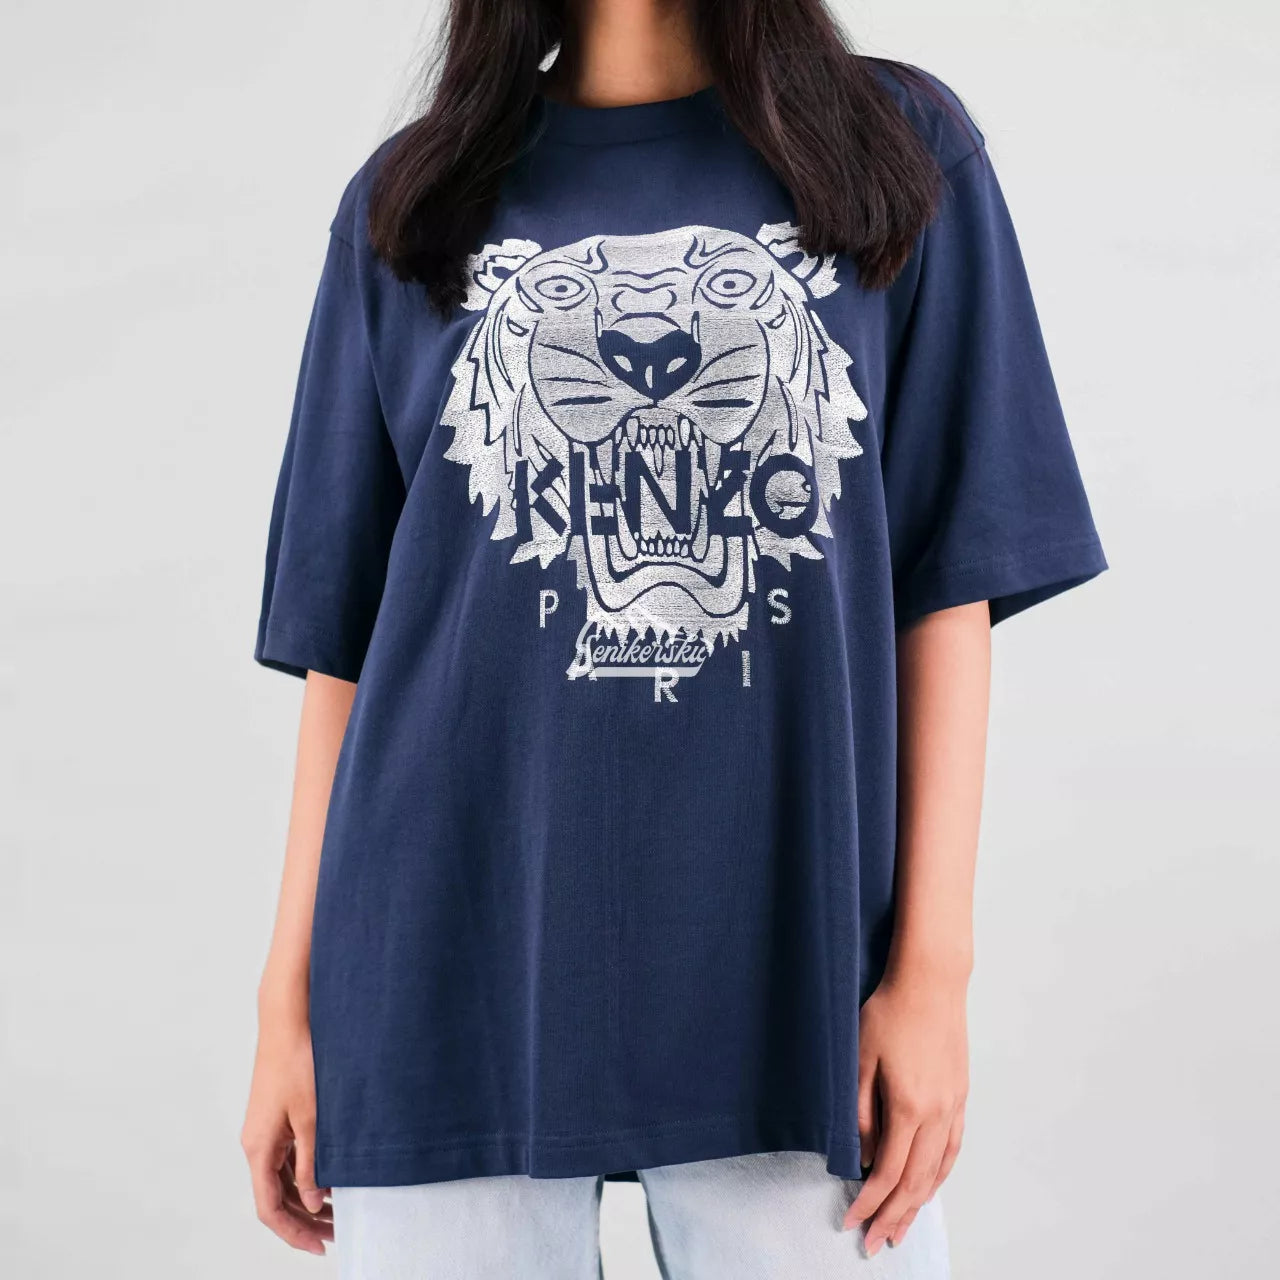 Kenzo Silver Embroidered Tiger T-shirt (Navy Blue)